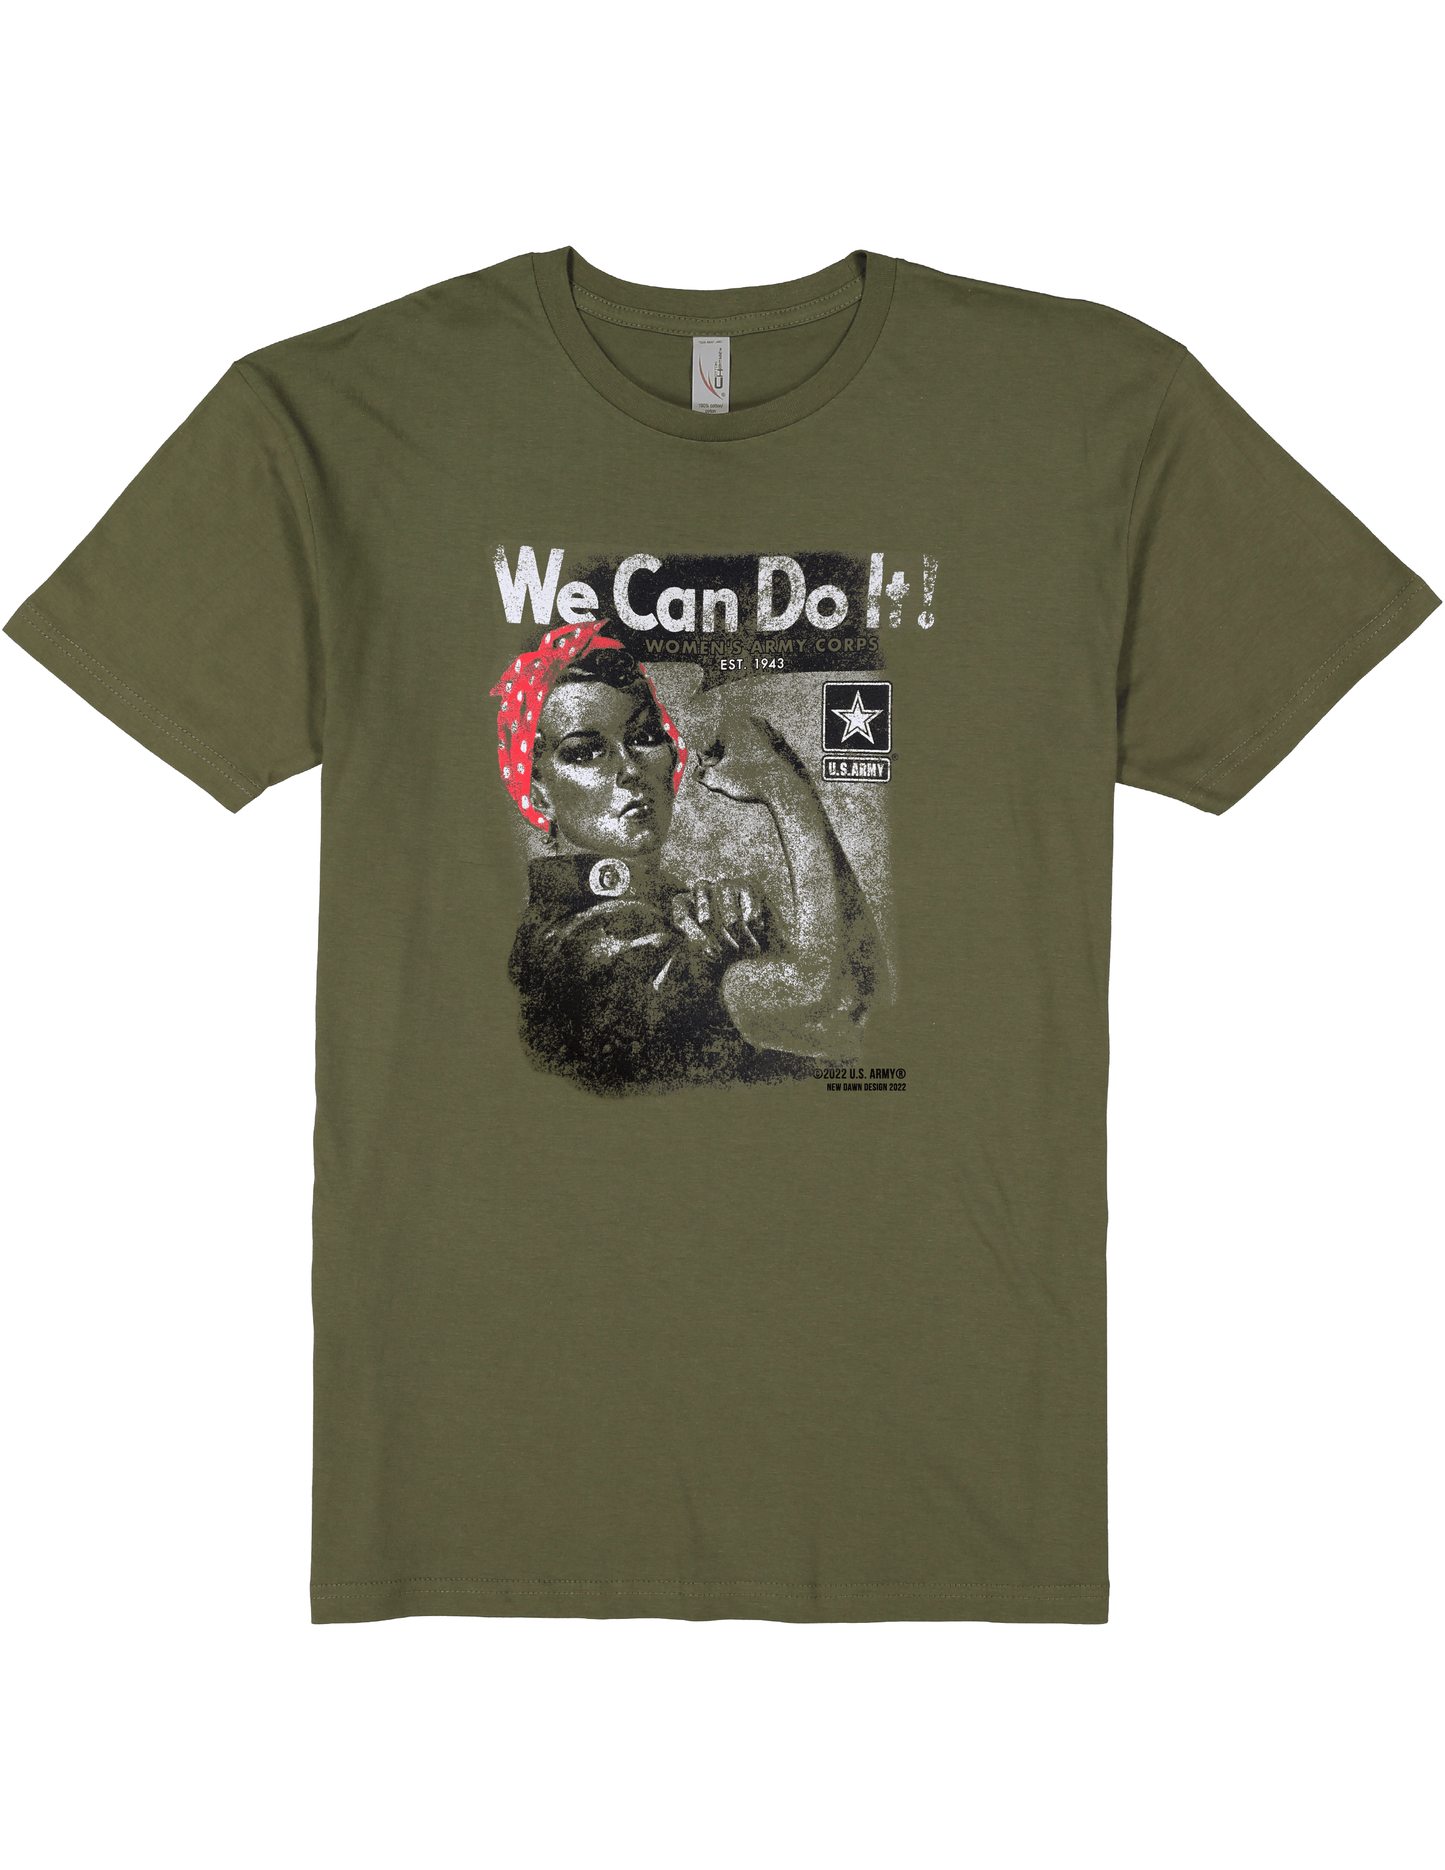 Rosie the Riveter | Women's Army Corps | U.S. Army ® Military Green Historical Graphic Unisex Tee